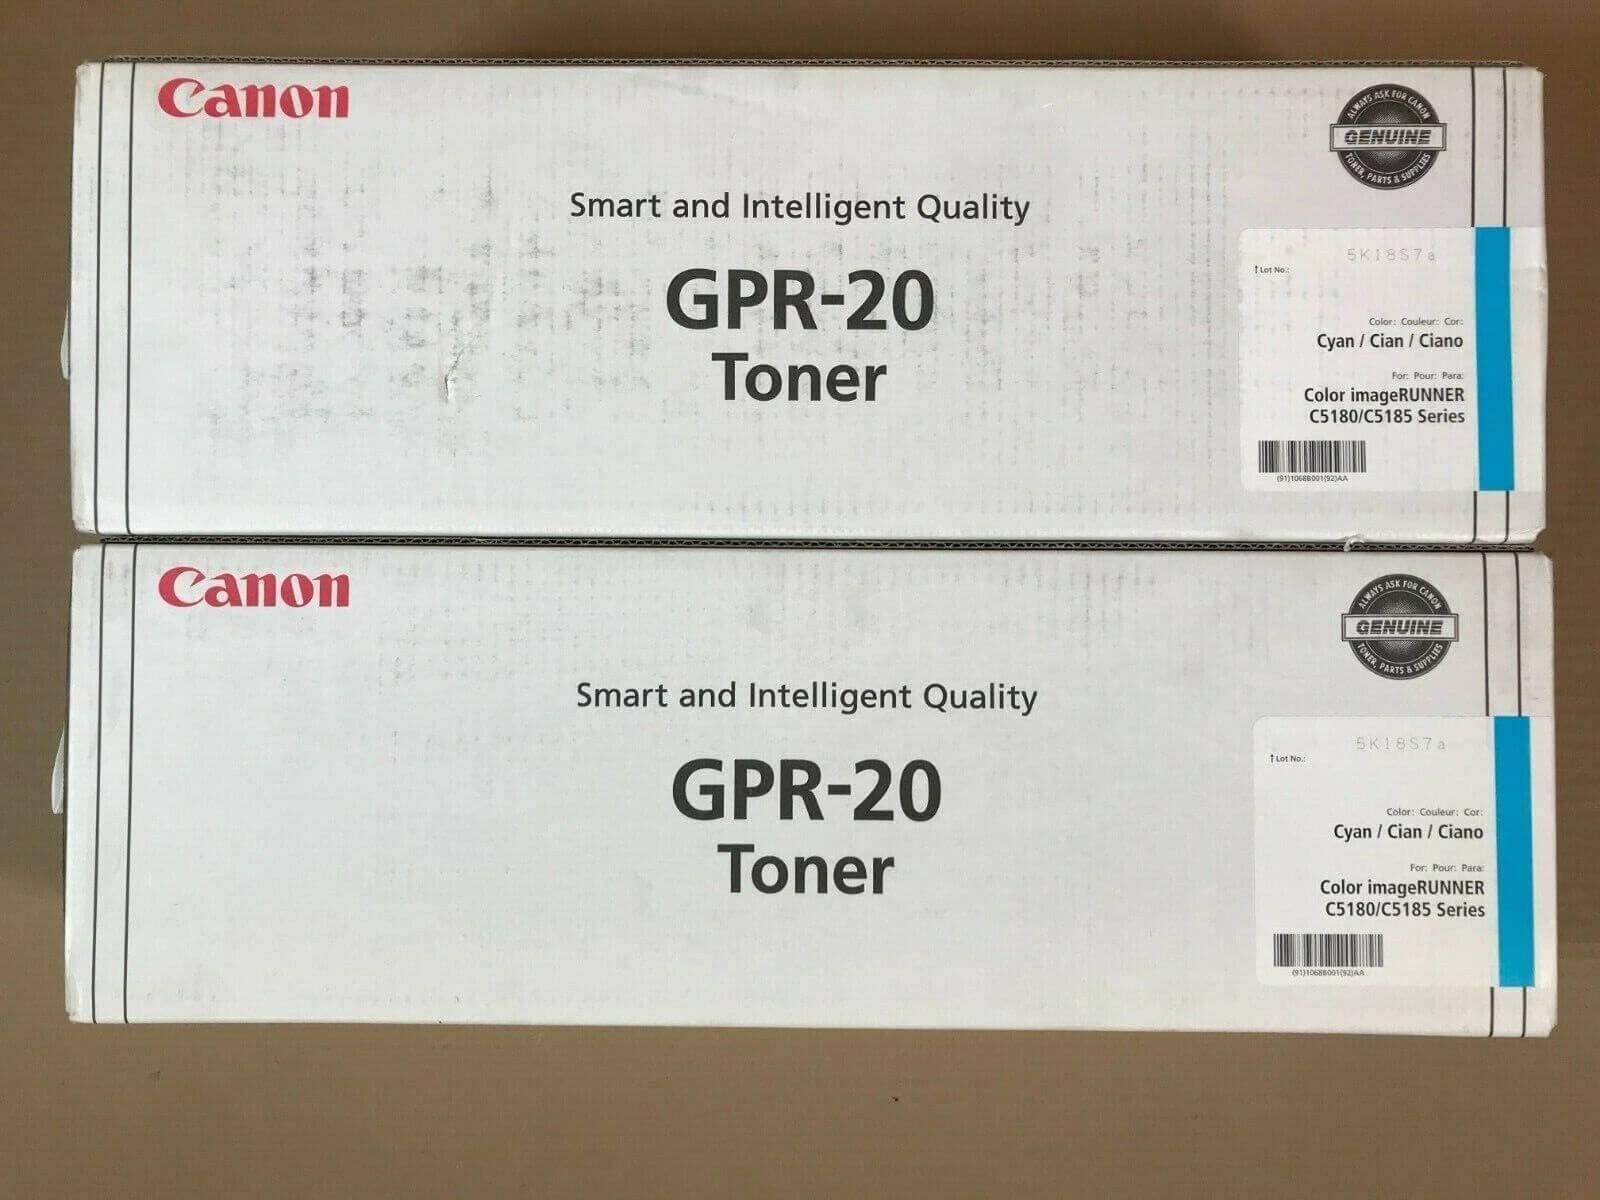 2 Genuine Canon GPR-20 Toners Cyan(X2) For Color imageRUNNER C5180/C5185 Series - copier-clearance-center